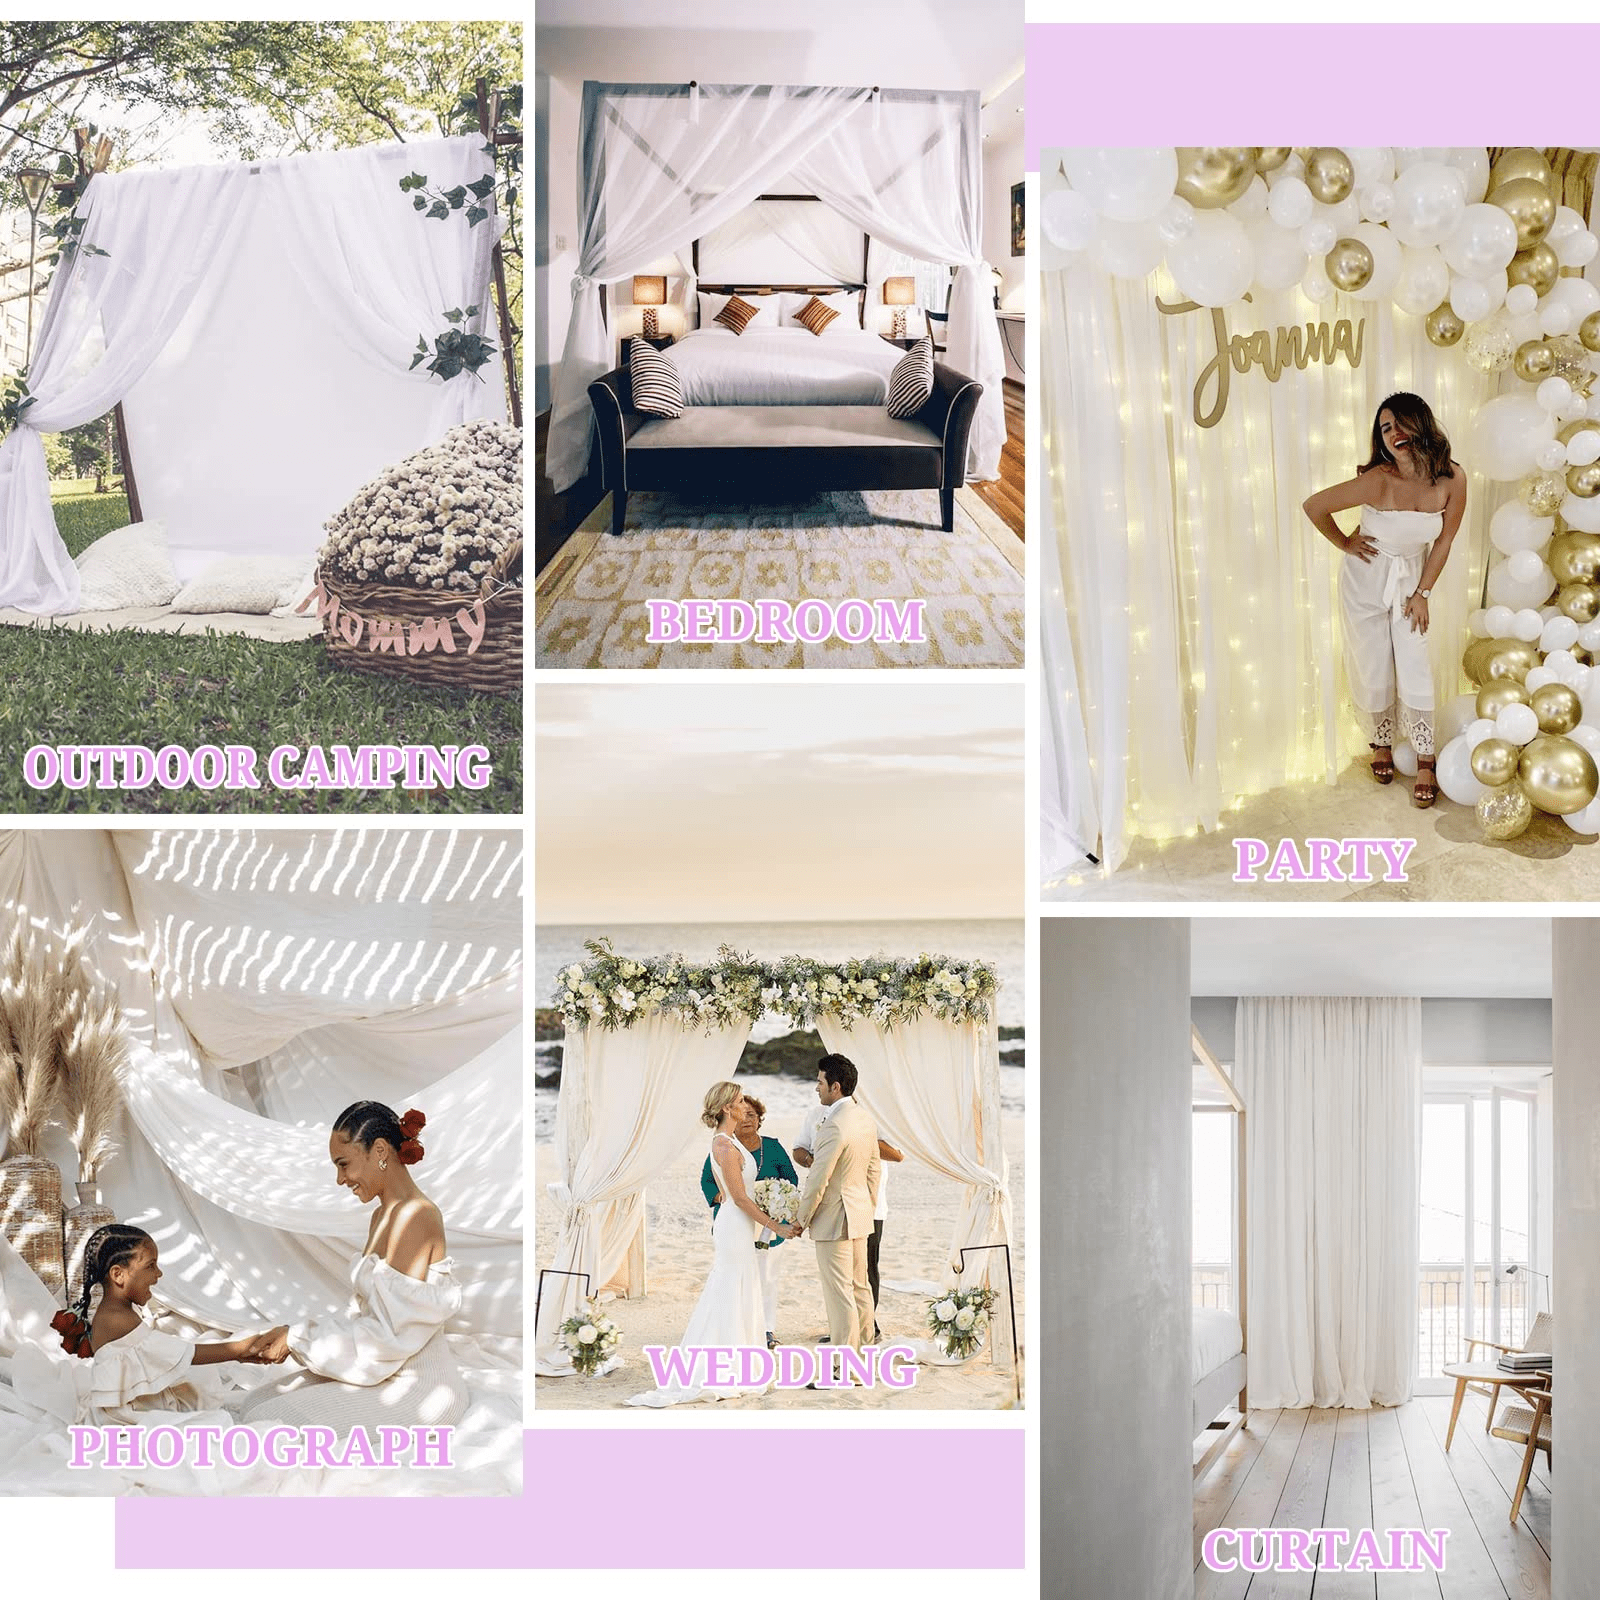 Chiffon Wedding Arch Draping Chiffon Fabric Party Decoration, 75x600CM  Sheer Backdrop Curtain For Ceiling Decor From Madebag, $34.02